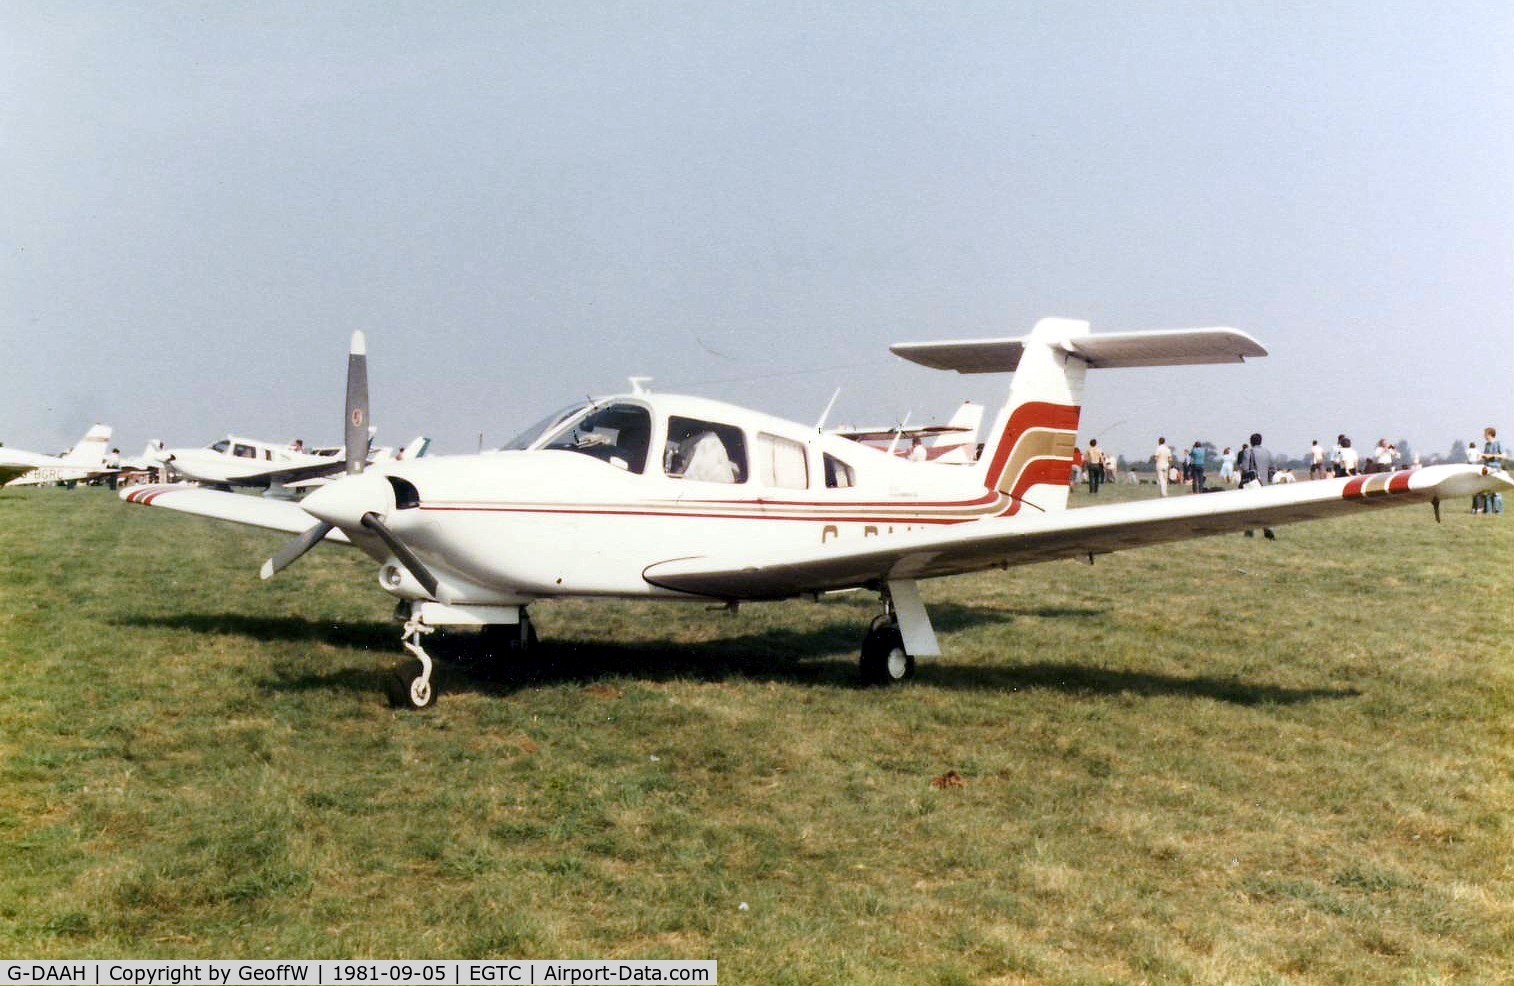 G-DAAH, 1979 Piper PA-28RT-201T Turbo Arrow IV C/N 28R-7931104, PA-28RT Arrow IV G-DAAH visiting the 1981 Cranfield Business and Light Aviation Exhibition